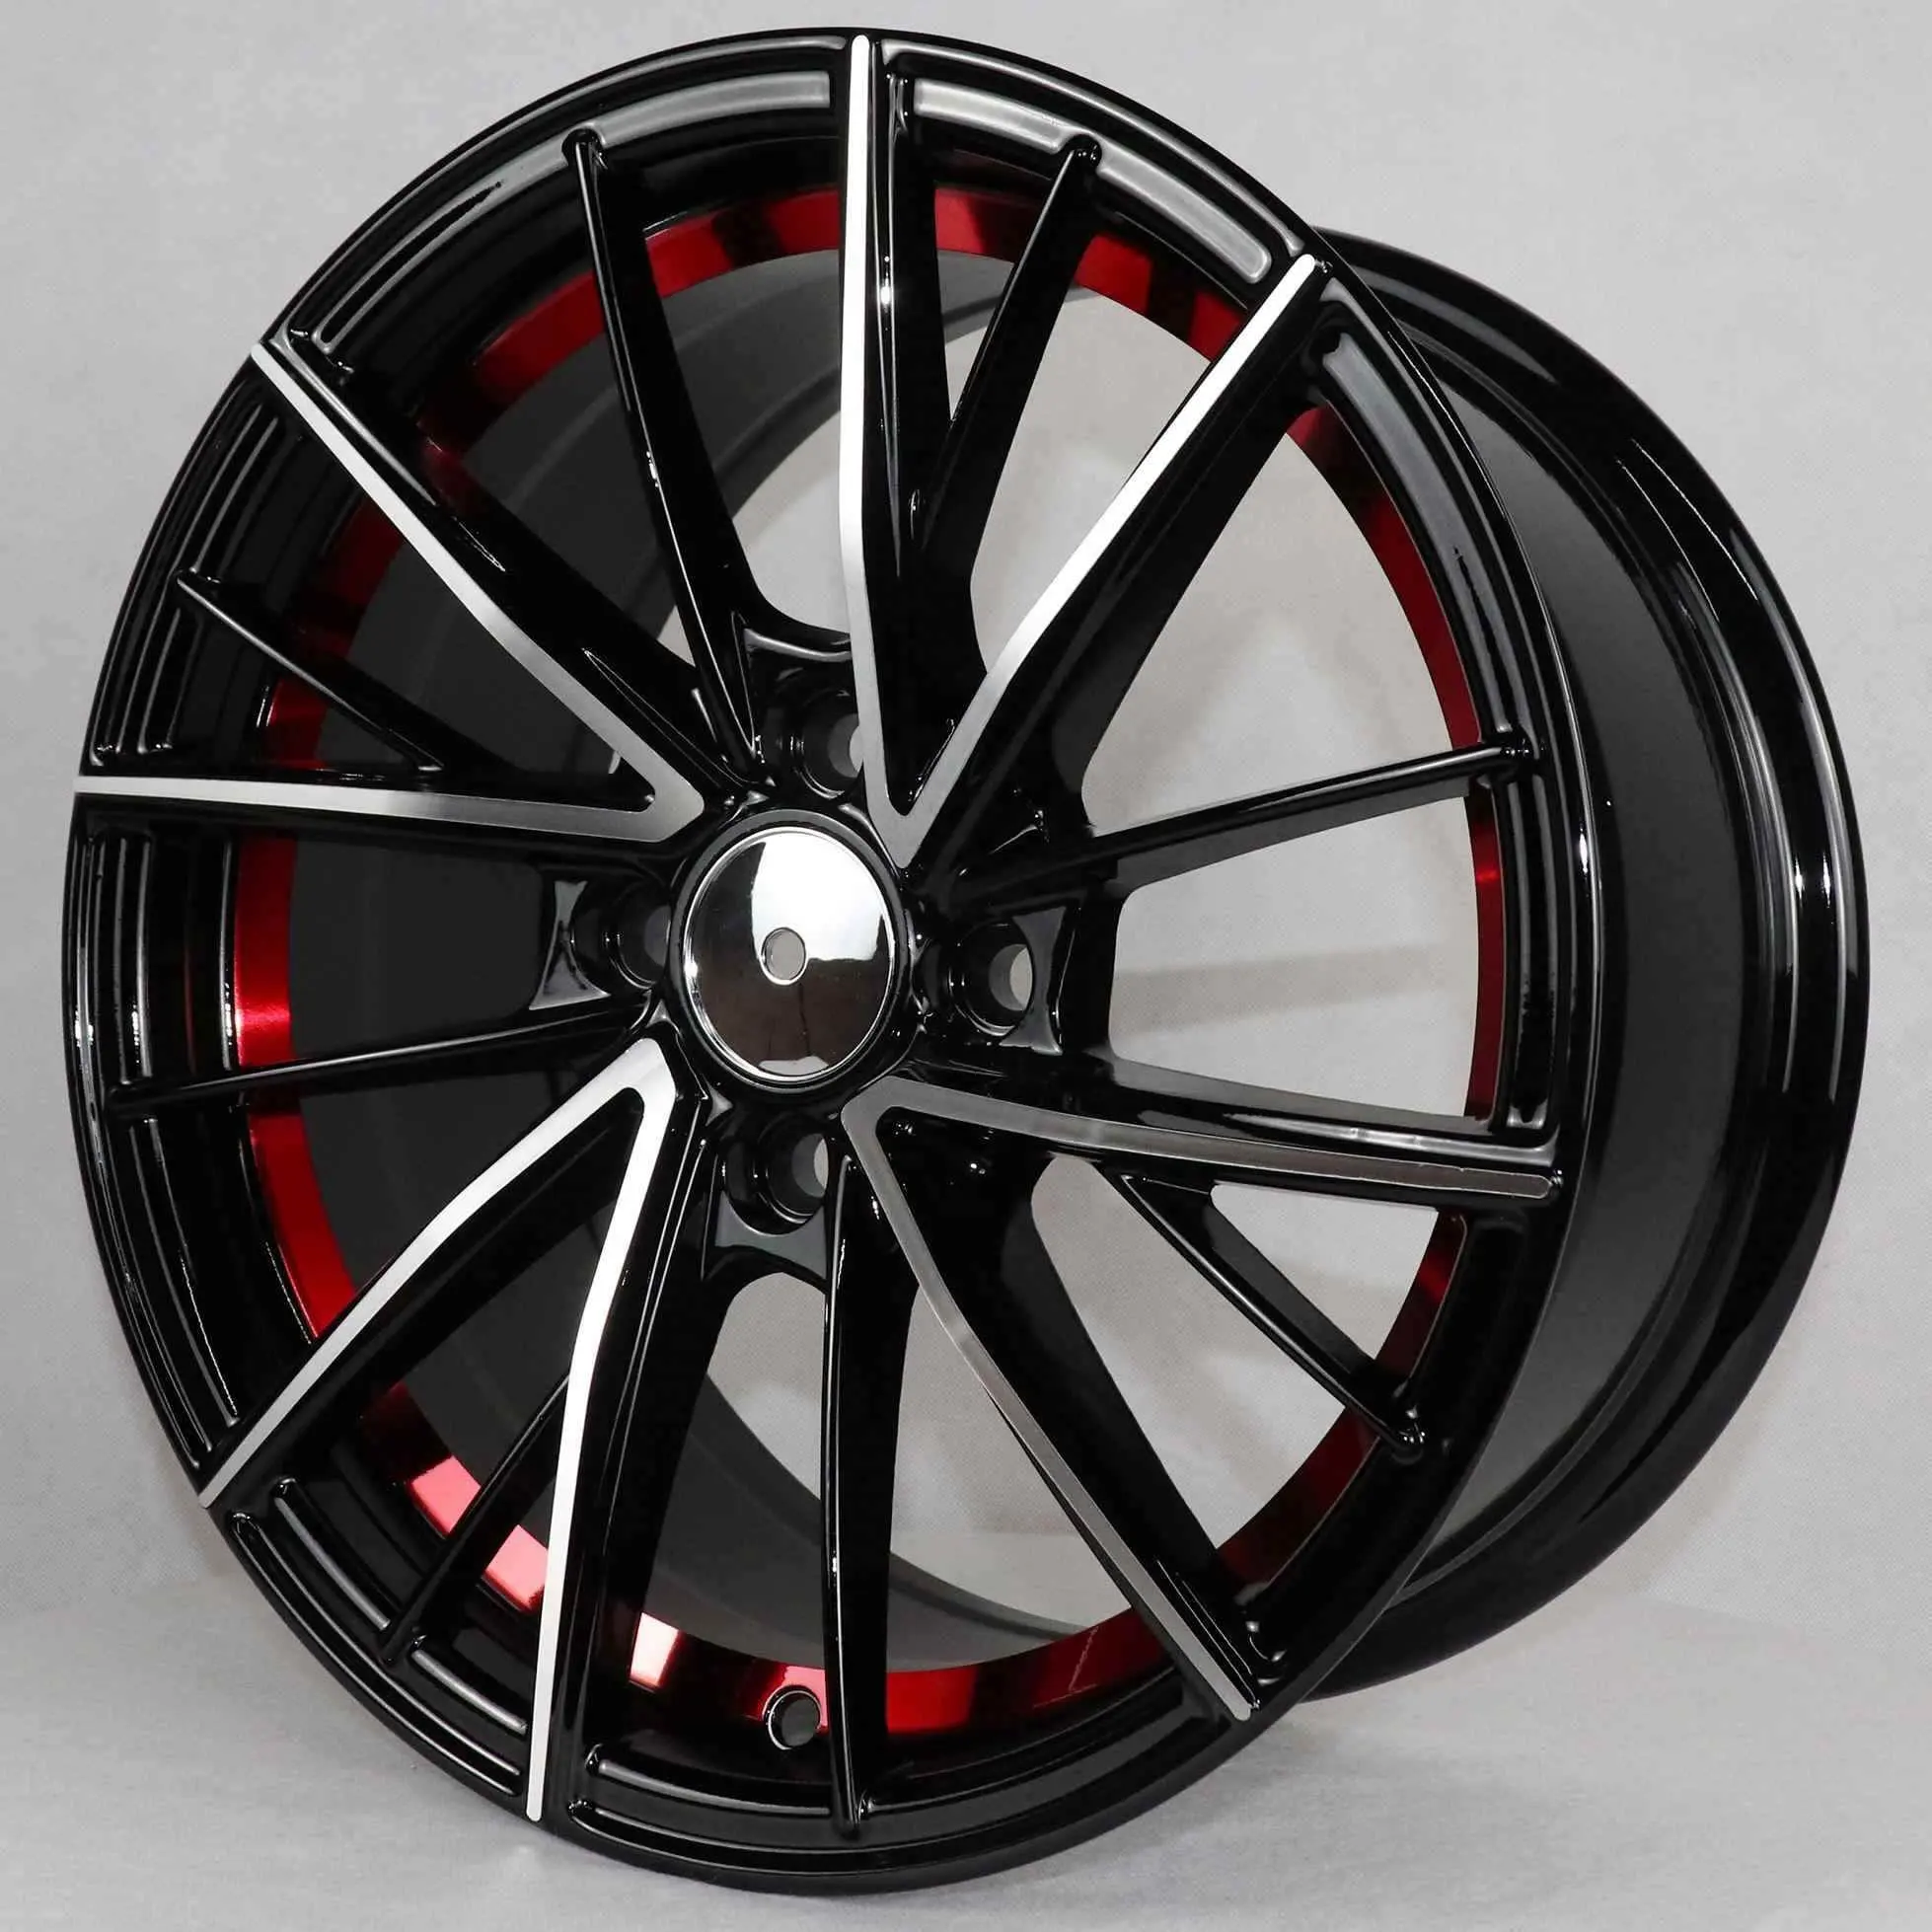 Flrocky Black And Red Finish Passenger Car Rims Size 15 Pcd 100 Alloy Wheels 4 Hole 5 Hole